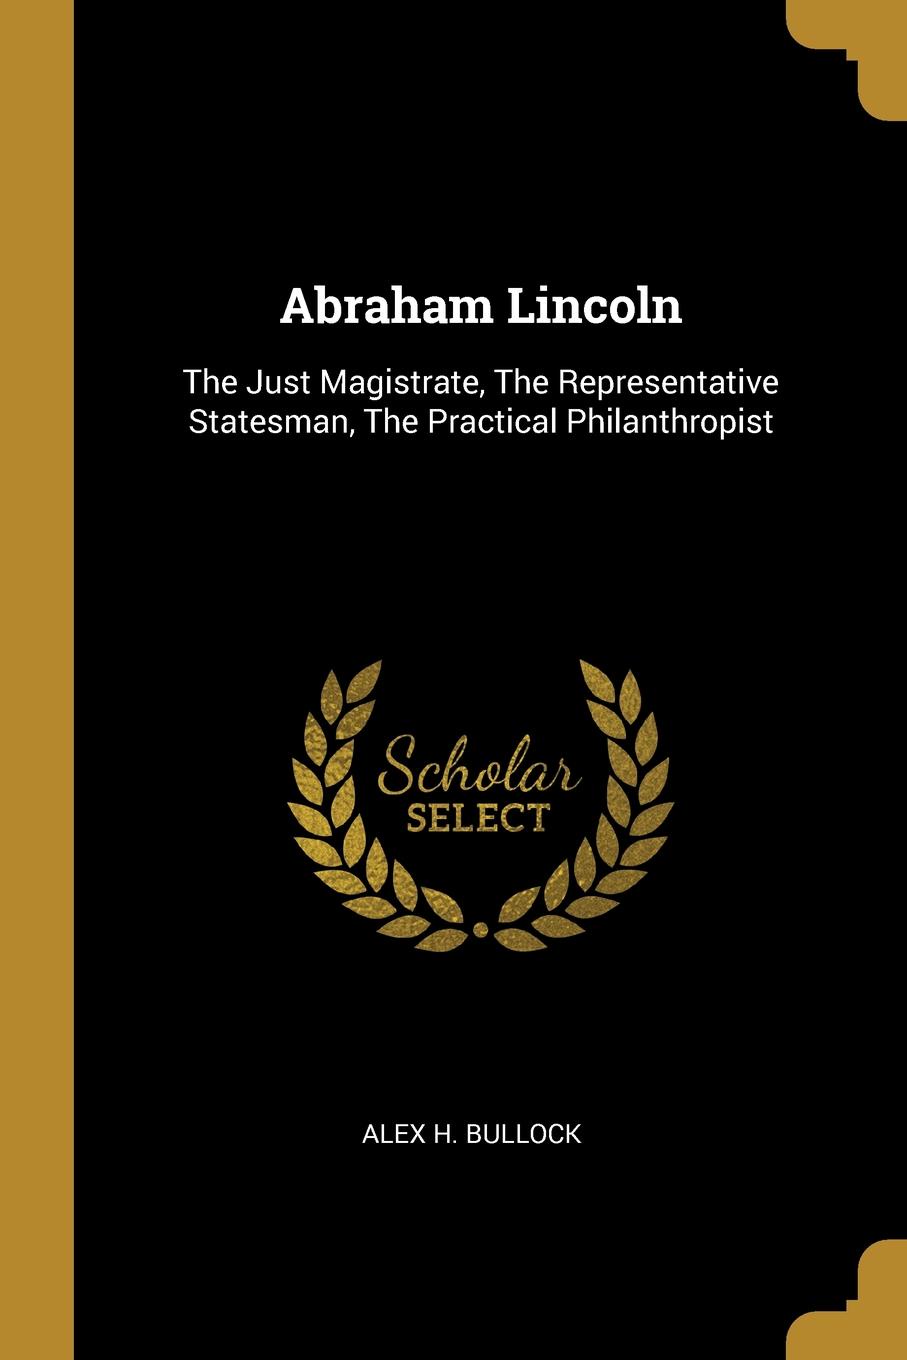 Abraham Lincoln. The Just Magistrate, The Representative Statesman, The Practical Philanthropist